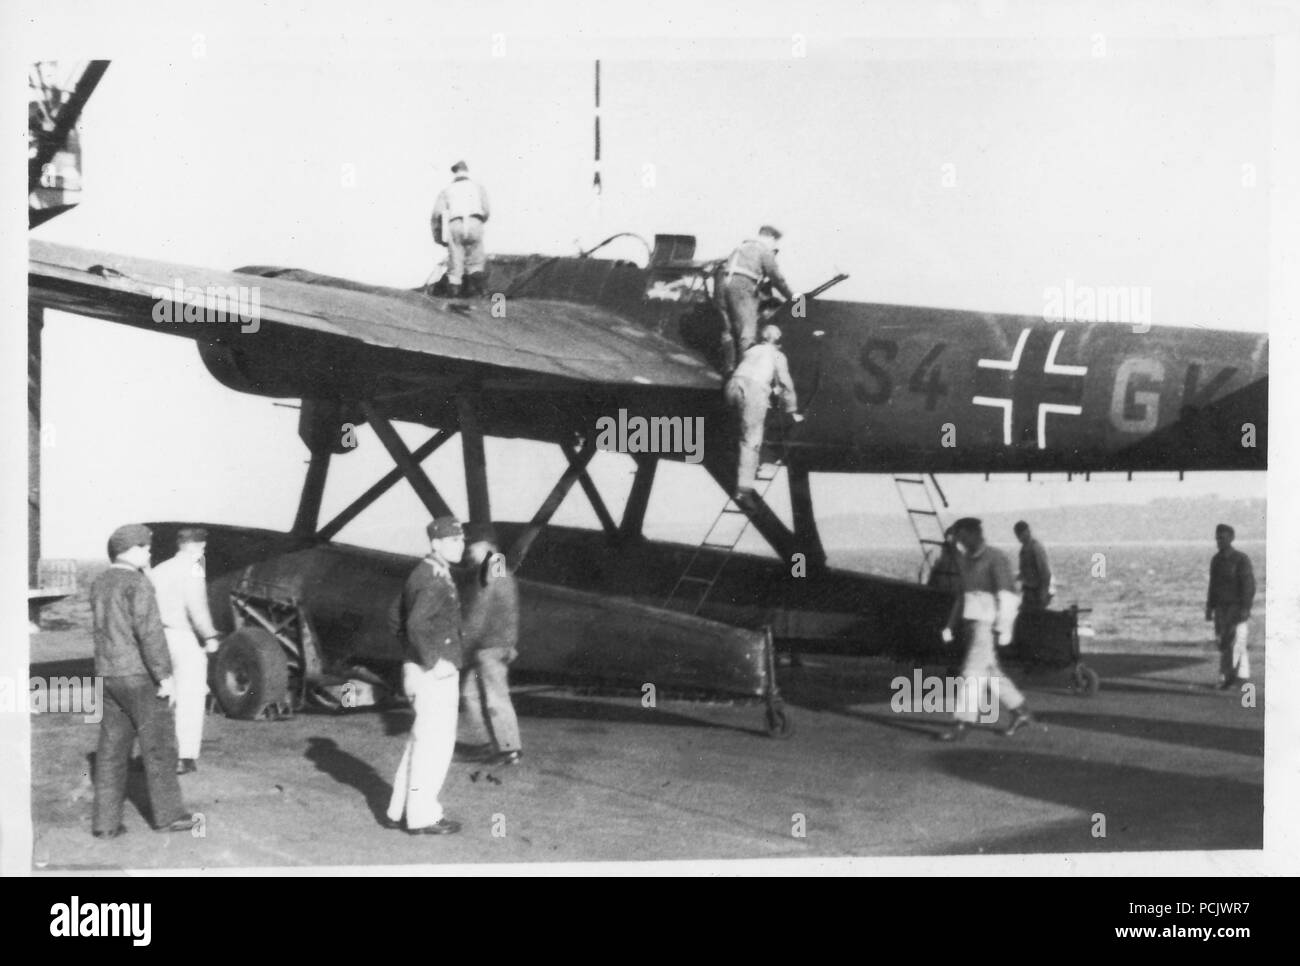 Image from the photo album of Oberleutnant Wilhelm Gaul - Still bearing the codes of its former unit, 2. Staffel, Küstenfliegergruppe 506, a Heinkel He 115 of 2. Staffel Küstenfliegergruppe 906 prepares to lift as the crew board in October 1941. Stock Photo